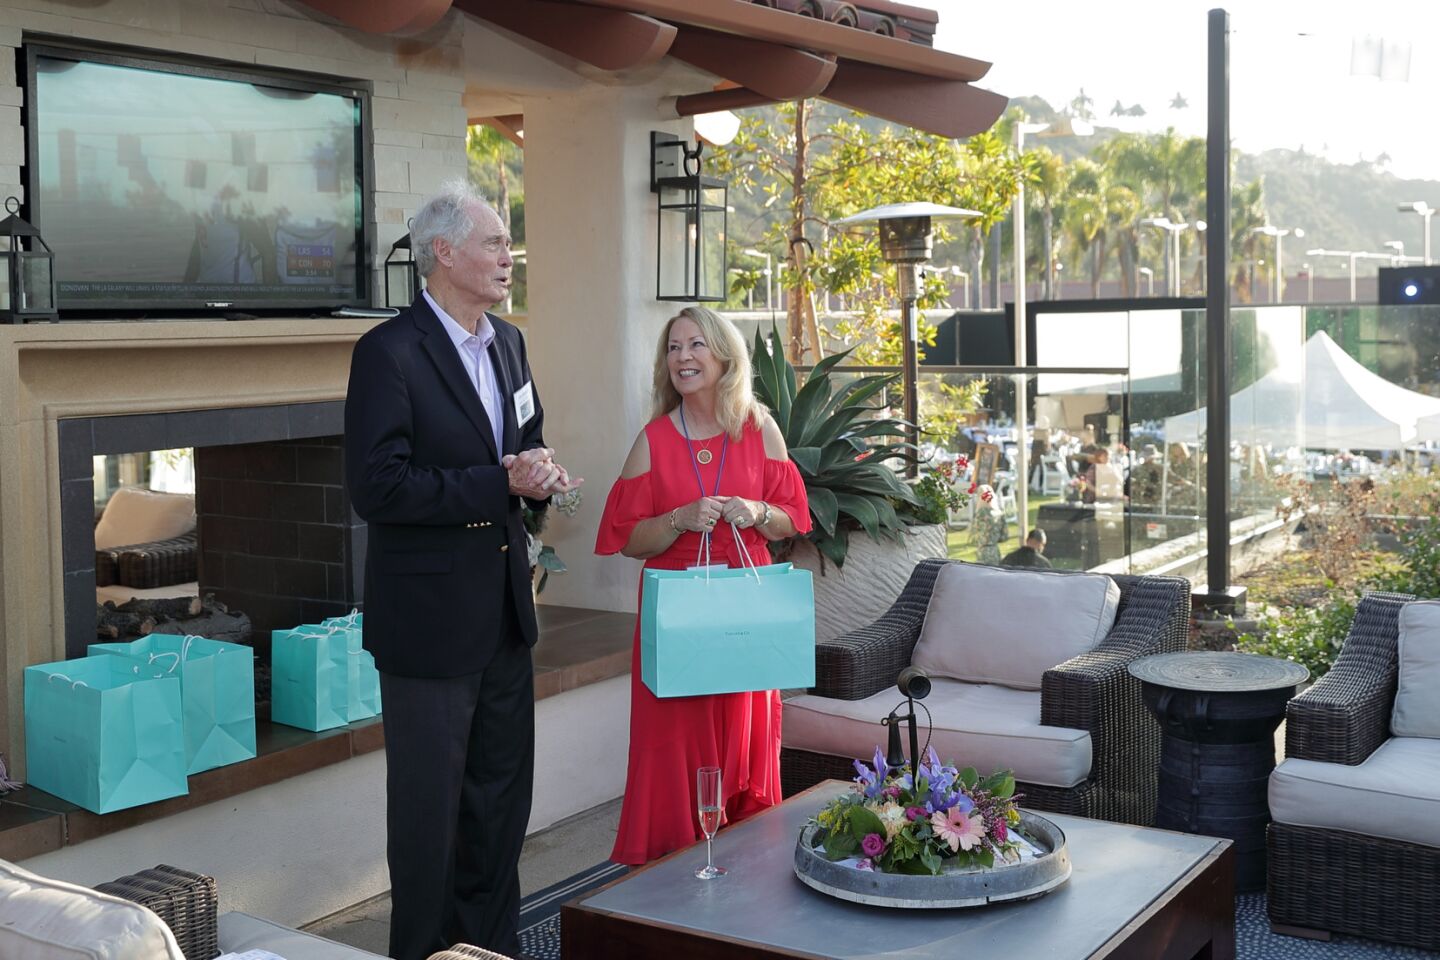 Sam and Vivian Hardage thanked their guests at the Sponsor Reception